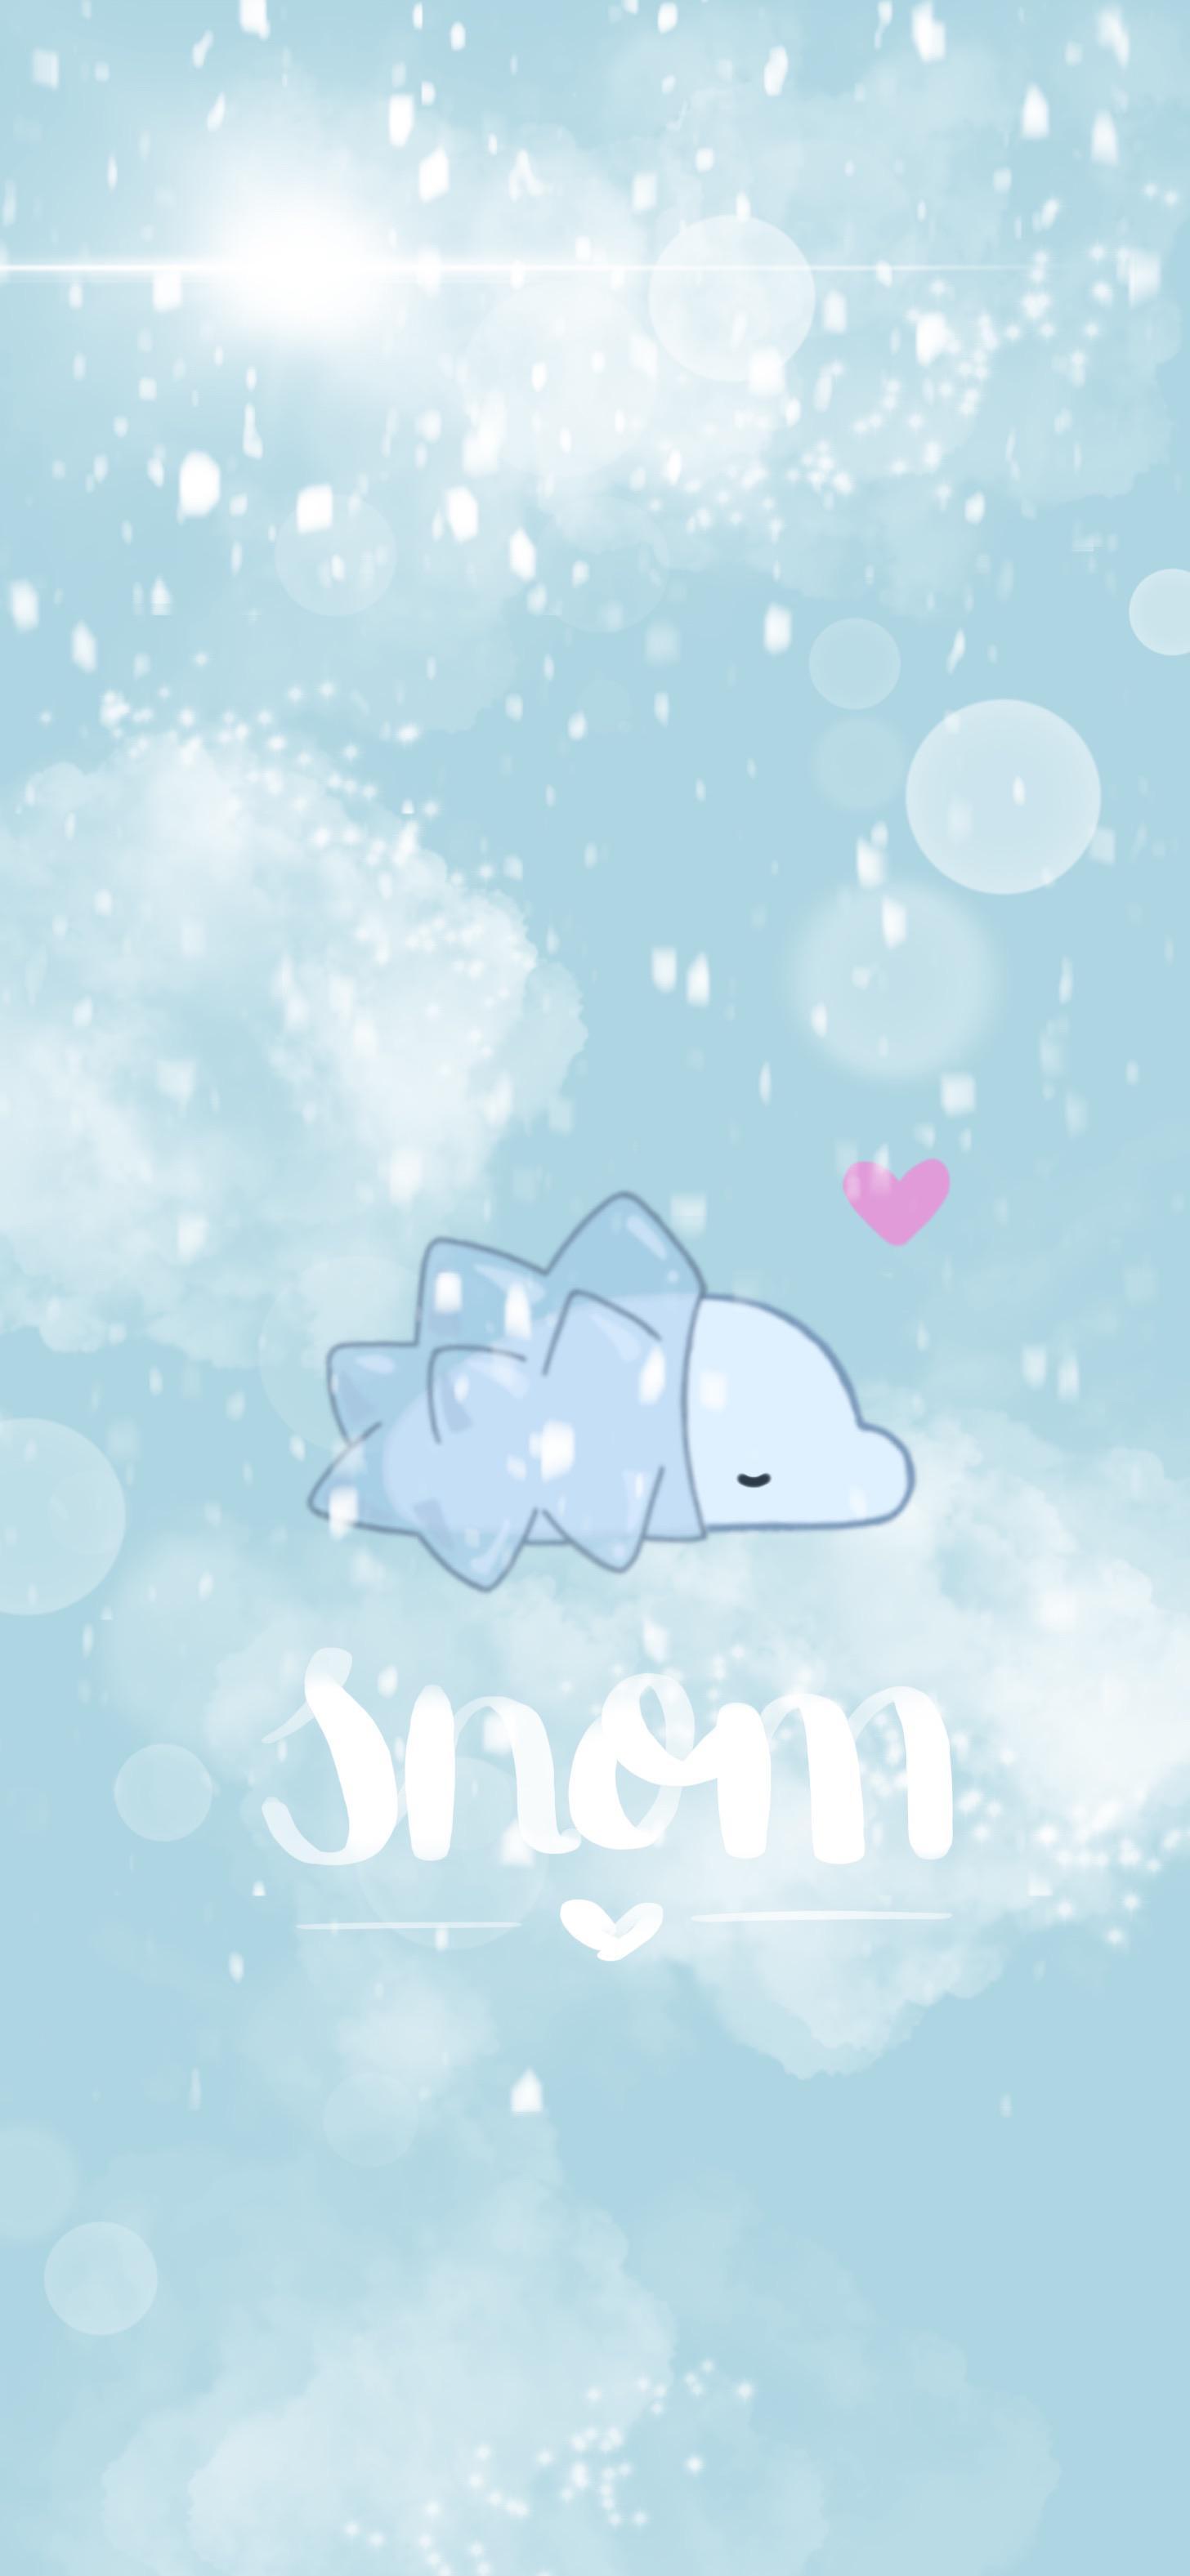 A snowy snom for my phone background this winter or forever